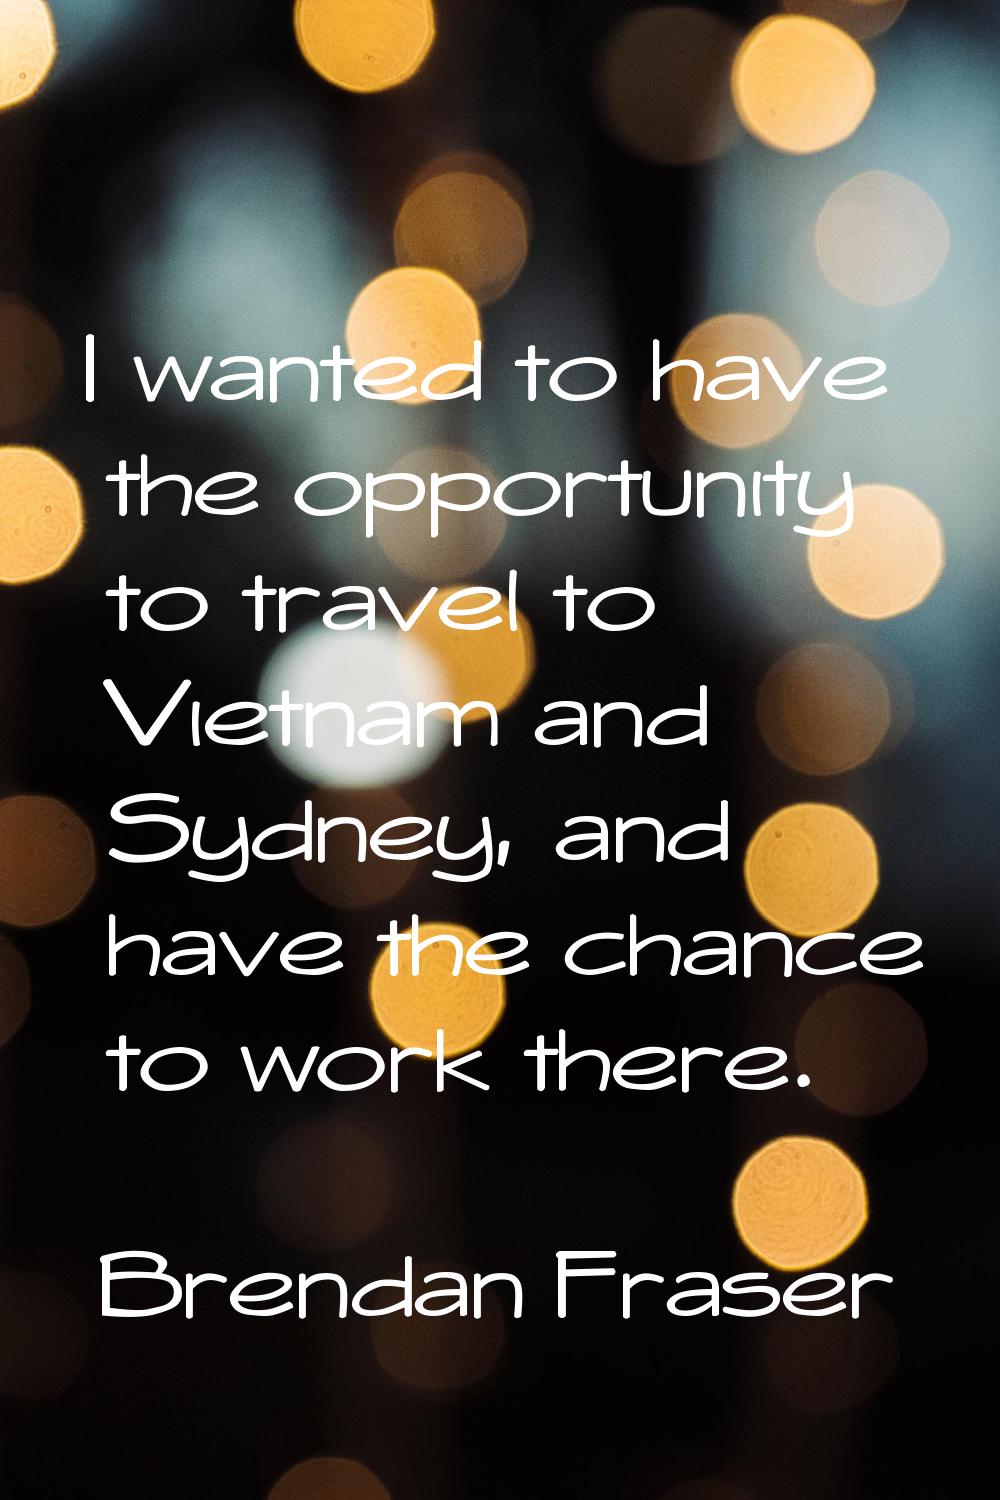 I wanted to have the opportunity to travel to Vietnam and Sydney, and have the chance to work there